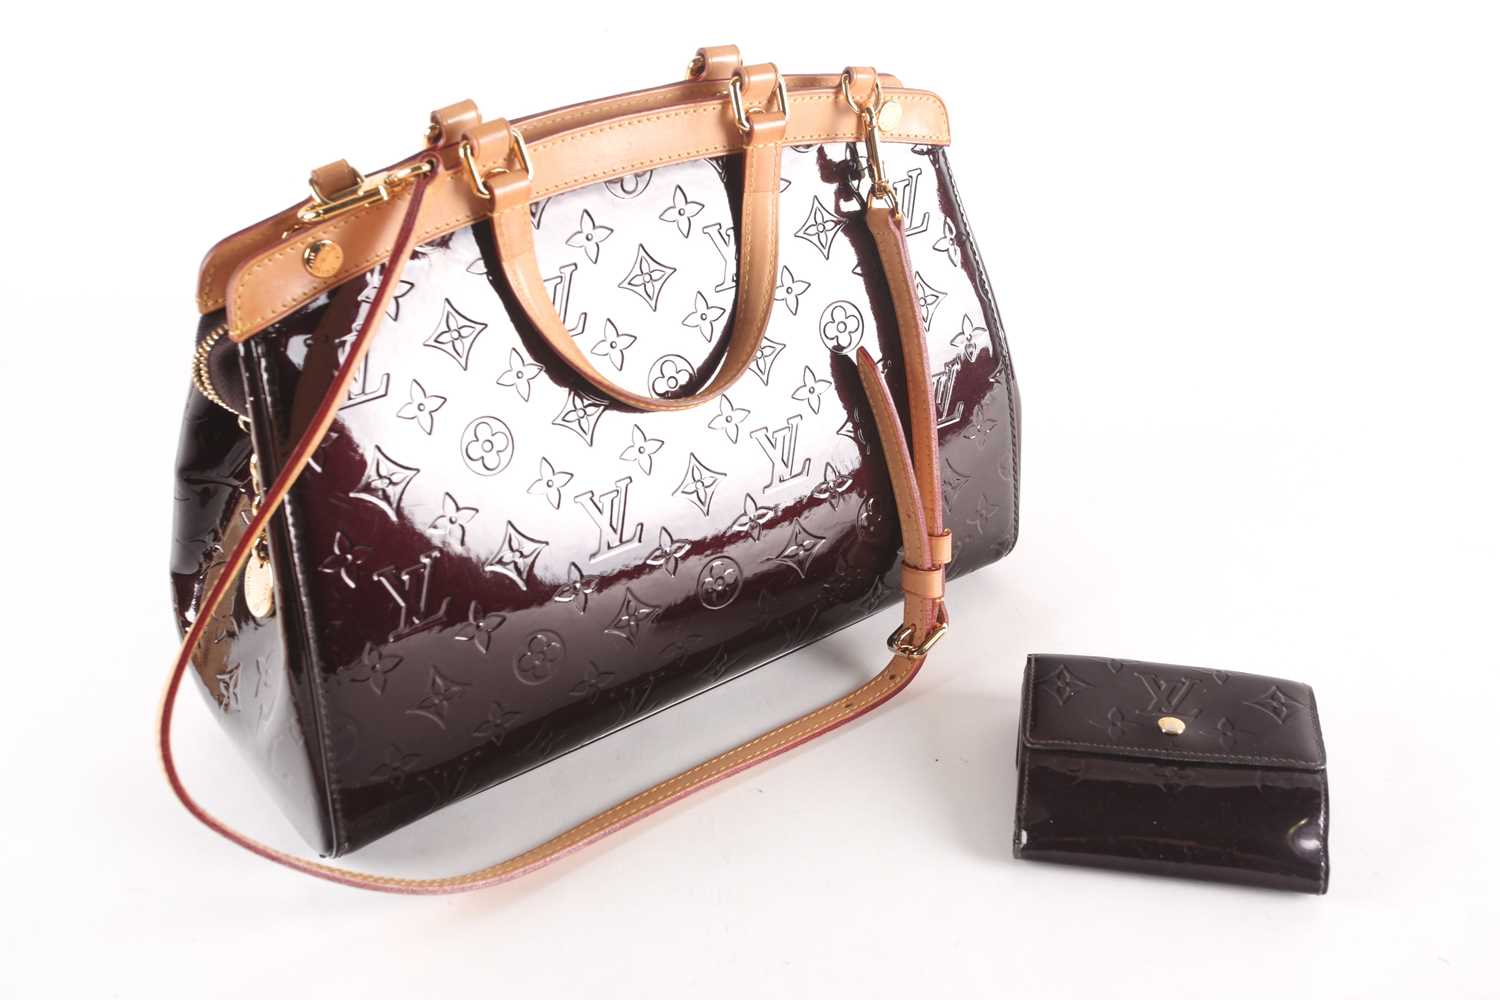 Lot 260 - A Louis Vuitton dark maroon patent leather